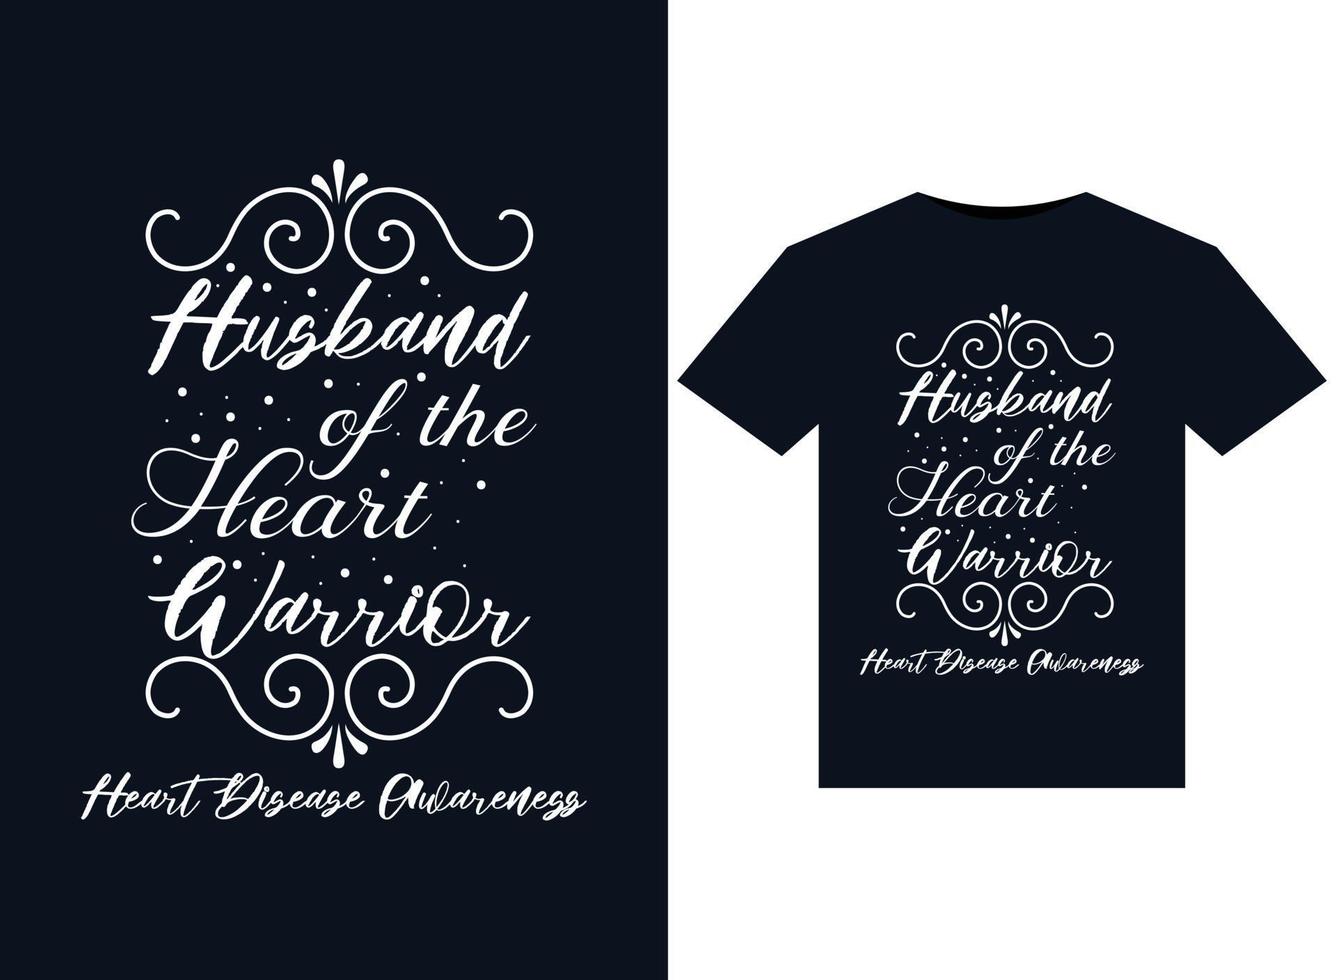 Husband of the Heart Warrior Heart Disease Awareness illustrations for print-ready T-Shirts design vector